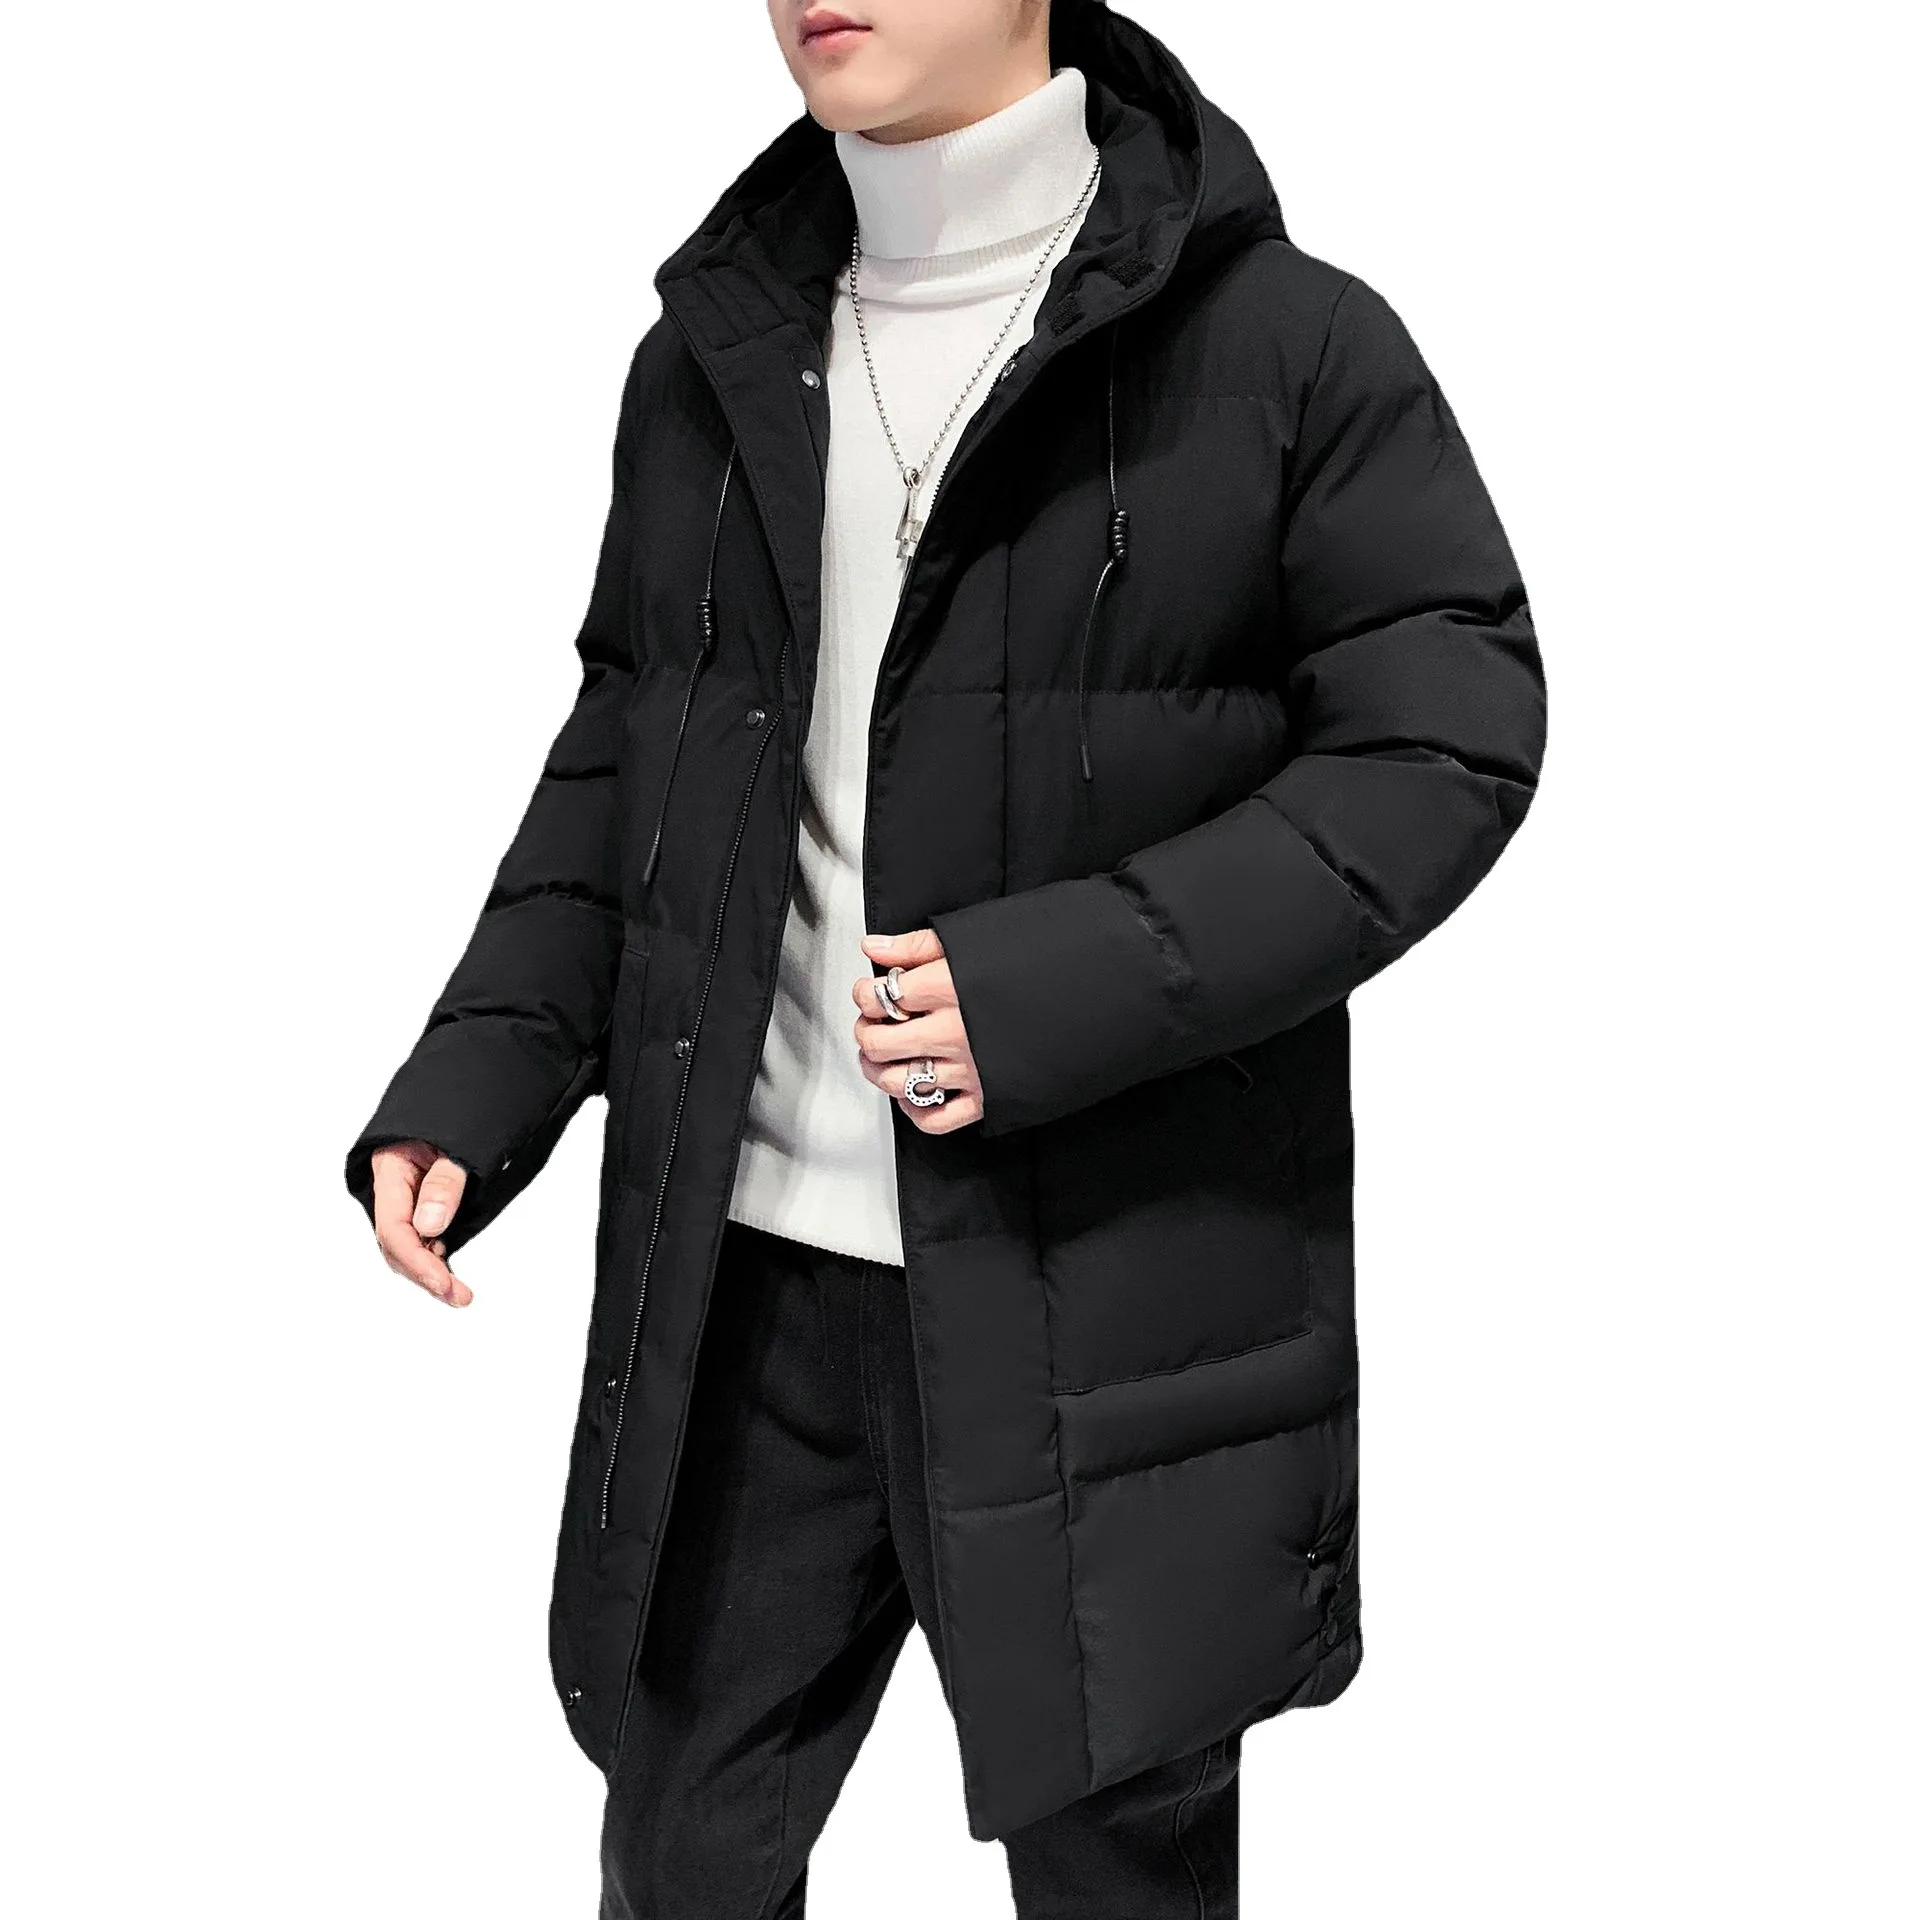 Long cotton-padded jacket men's winter thickened young and middle-aged coat solid color casual cotton-padded jacket hooded